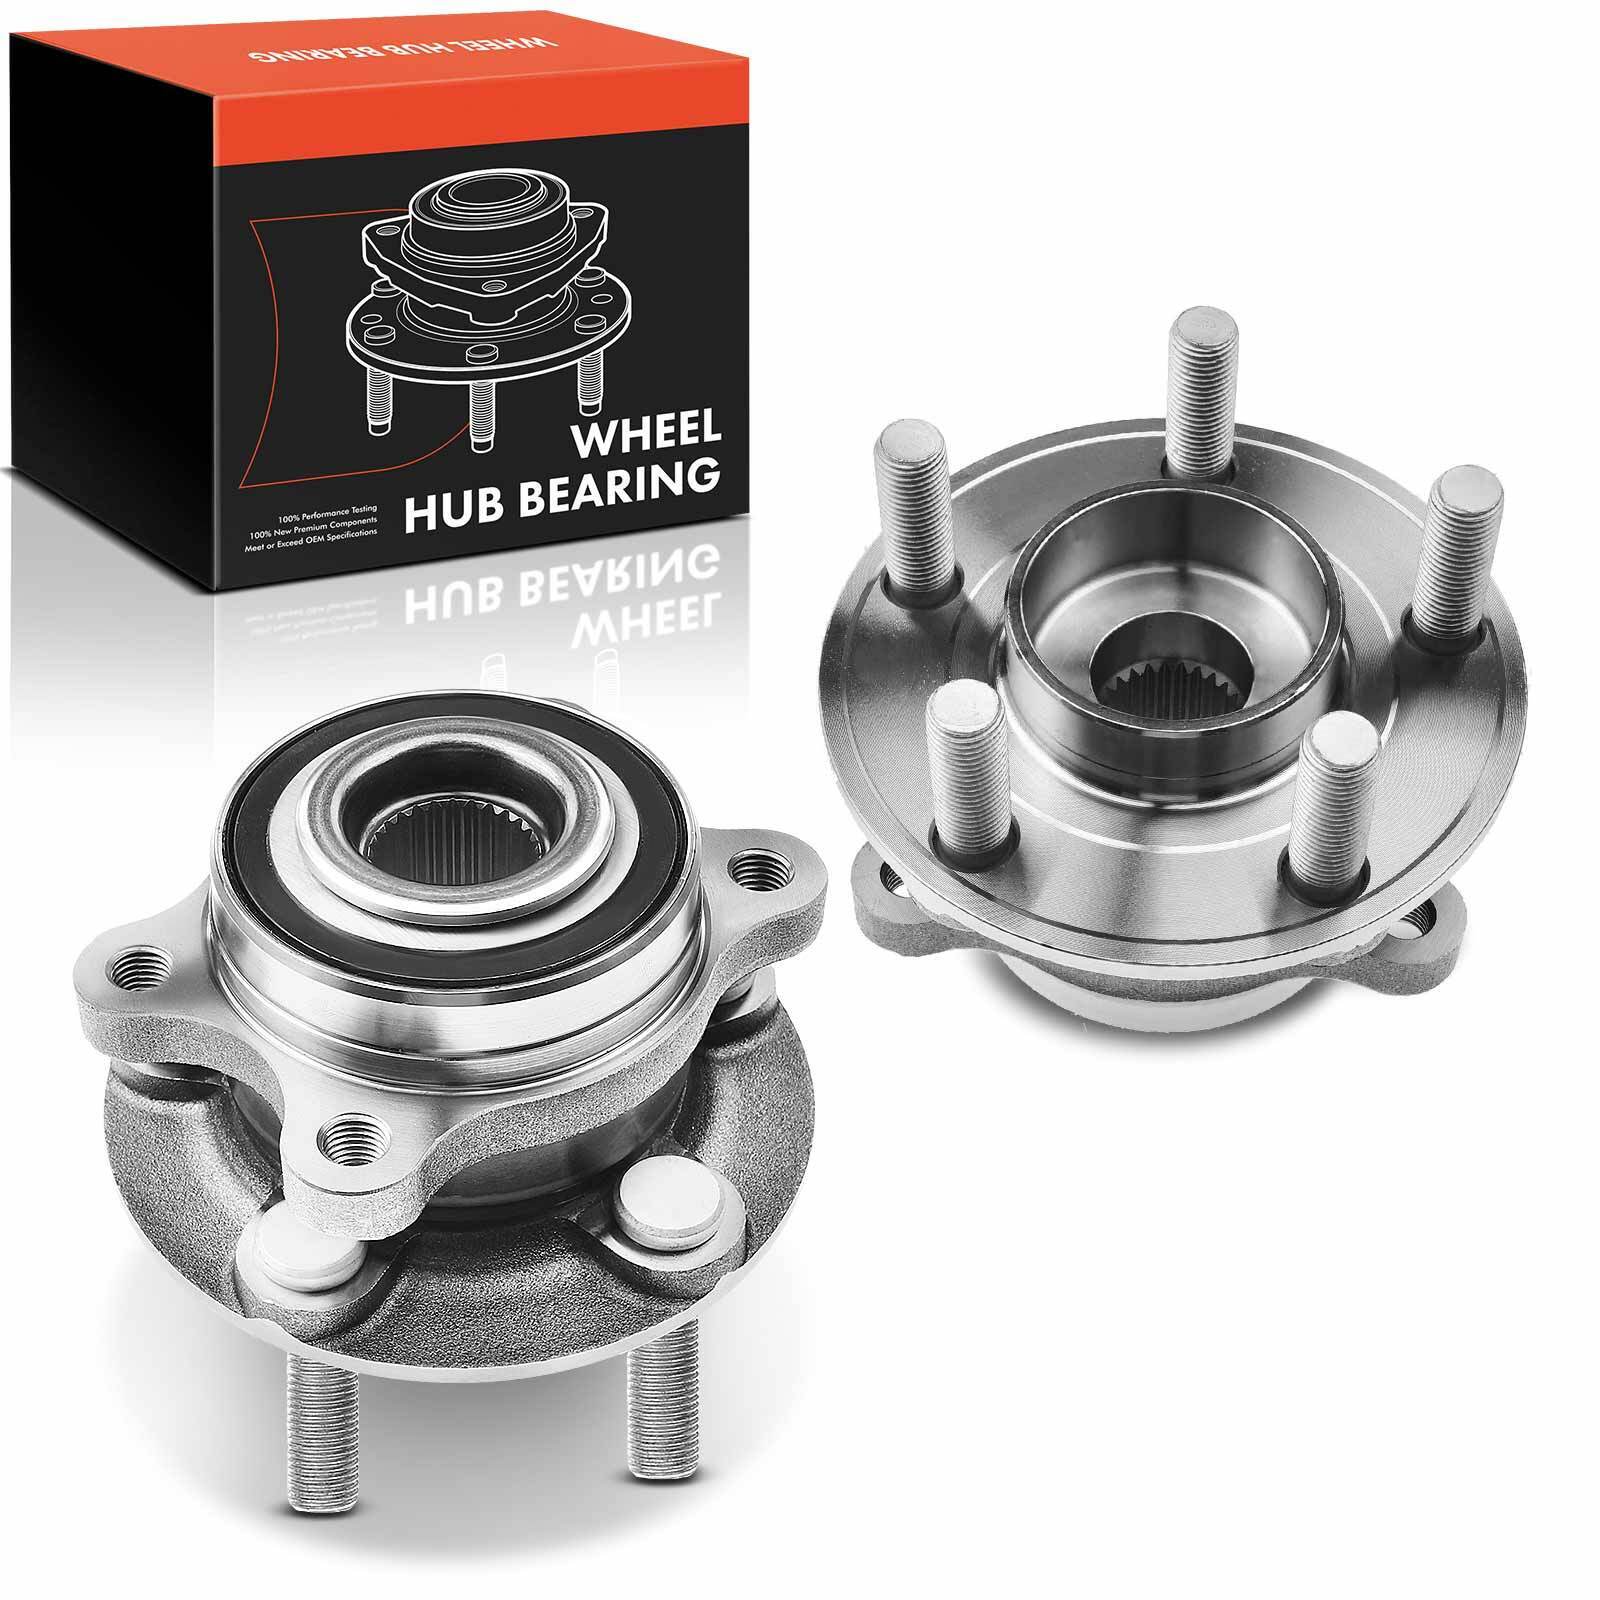 2x L & R Wheel Hub Bearing Assembly for Ford Edge Fusion Lincoln Continental MKX